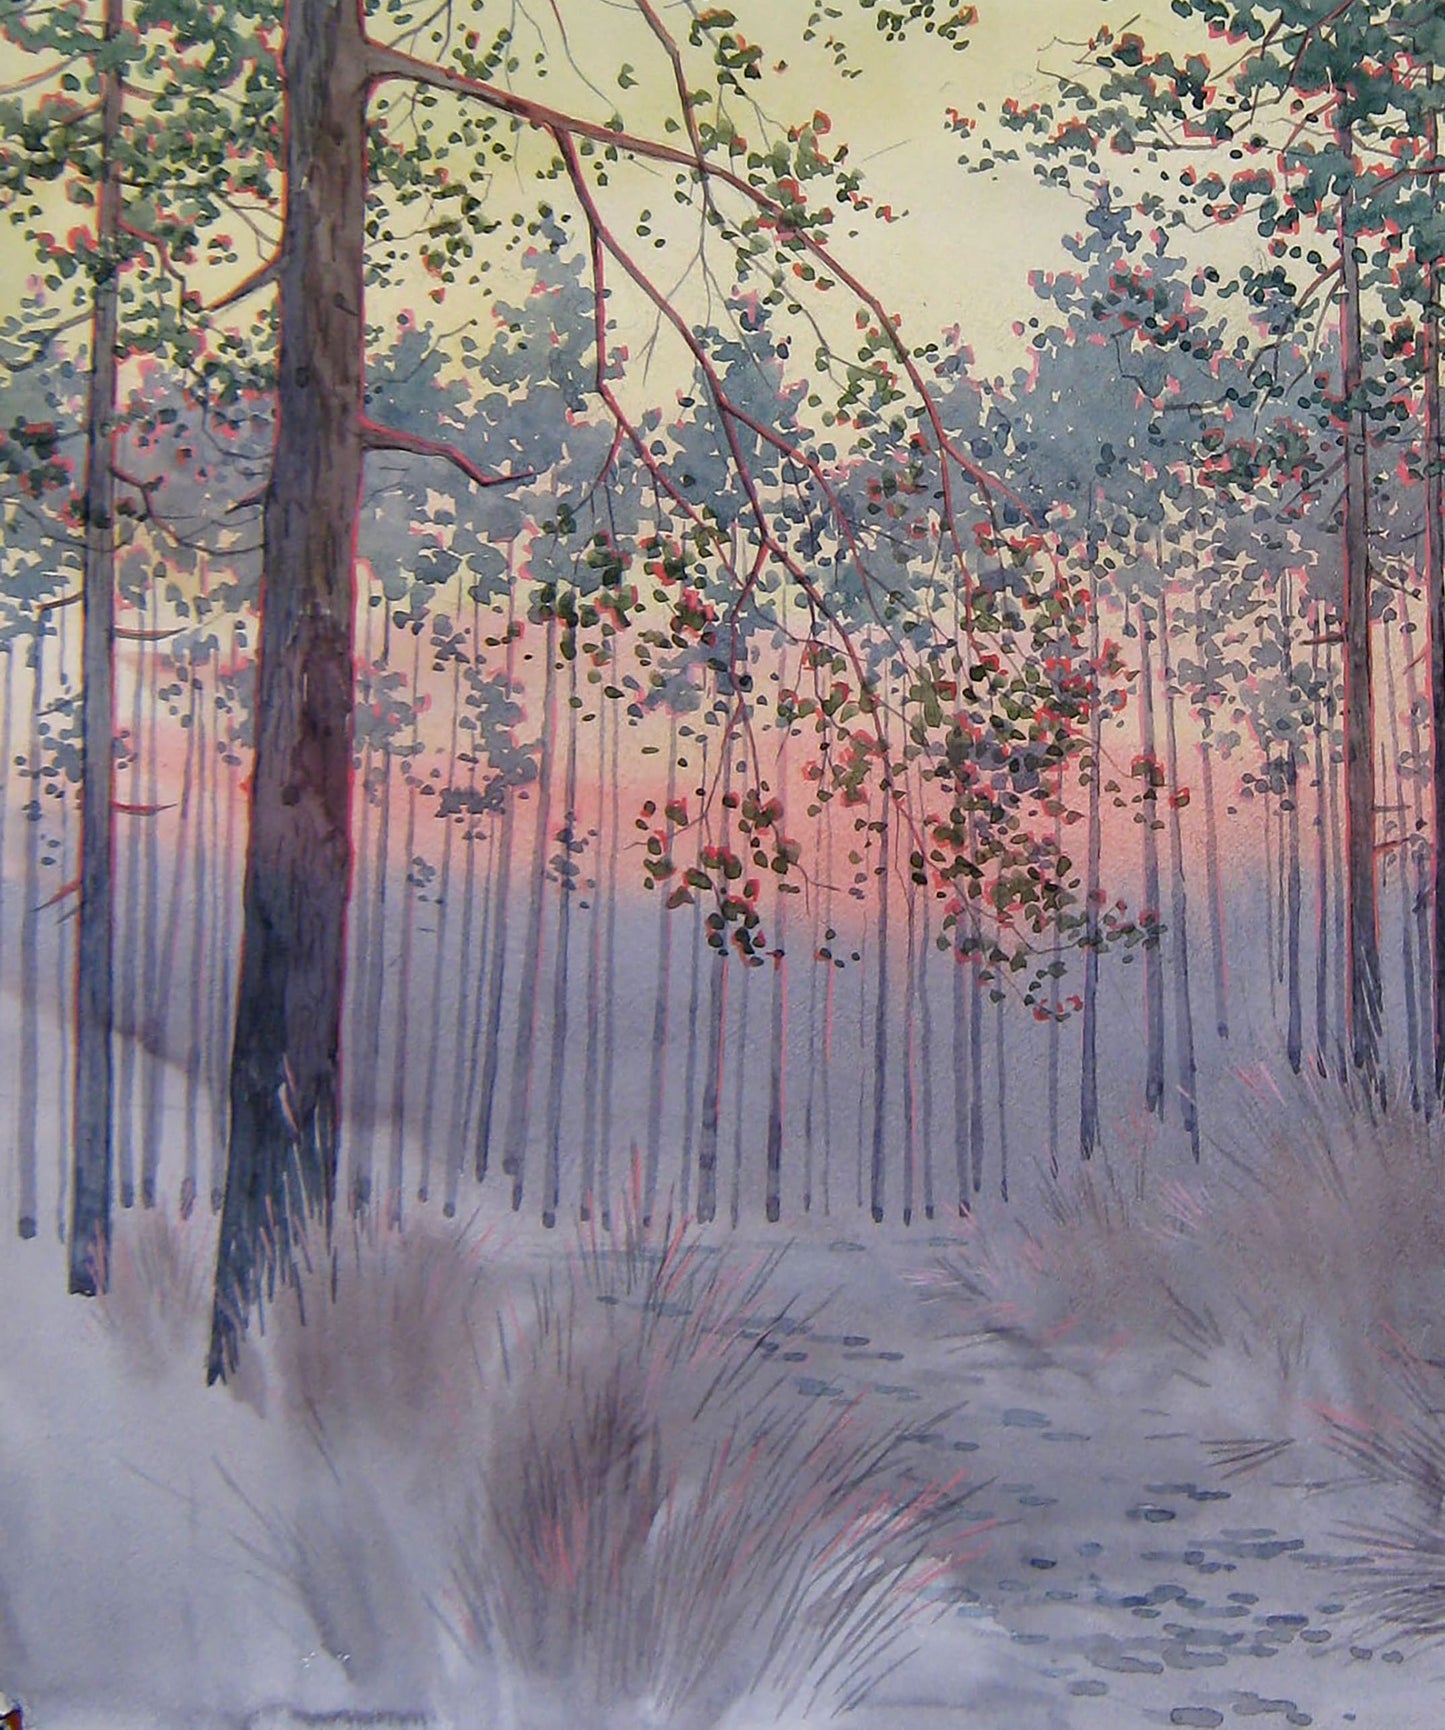 February Sunset in the Forest, a watercolor painting by Valery Savenets